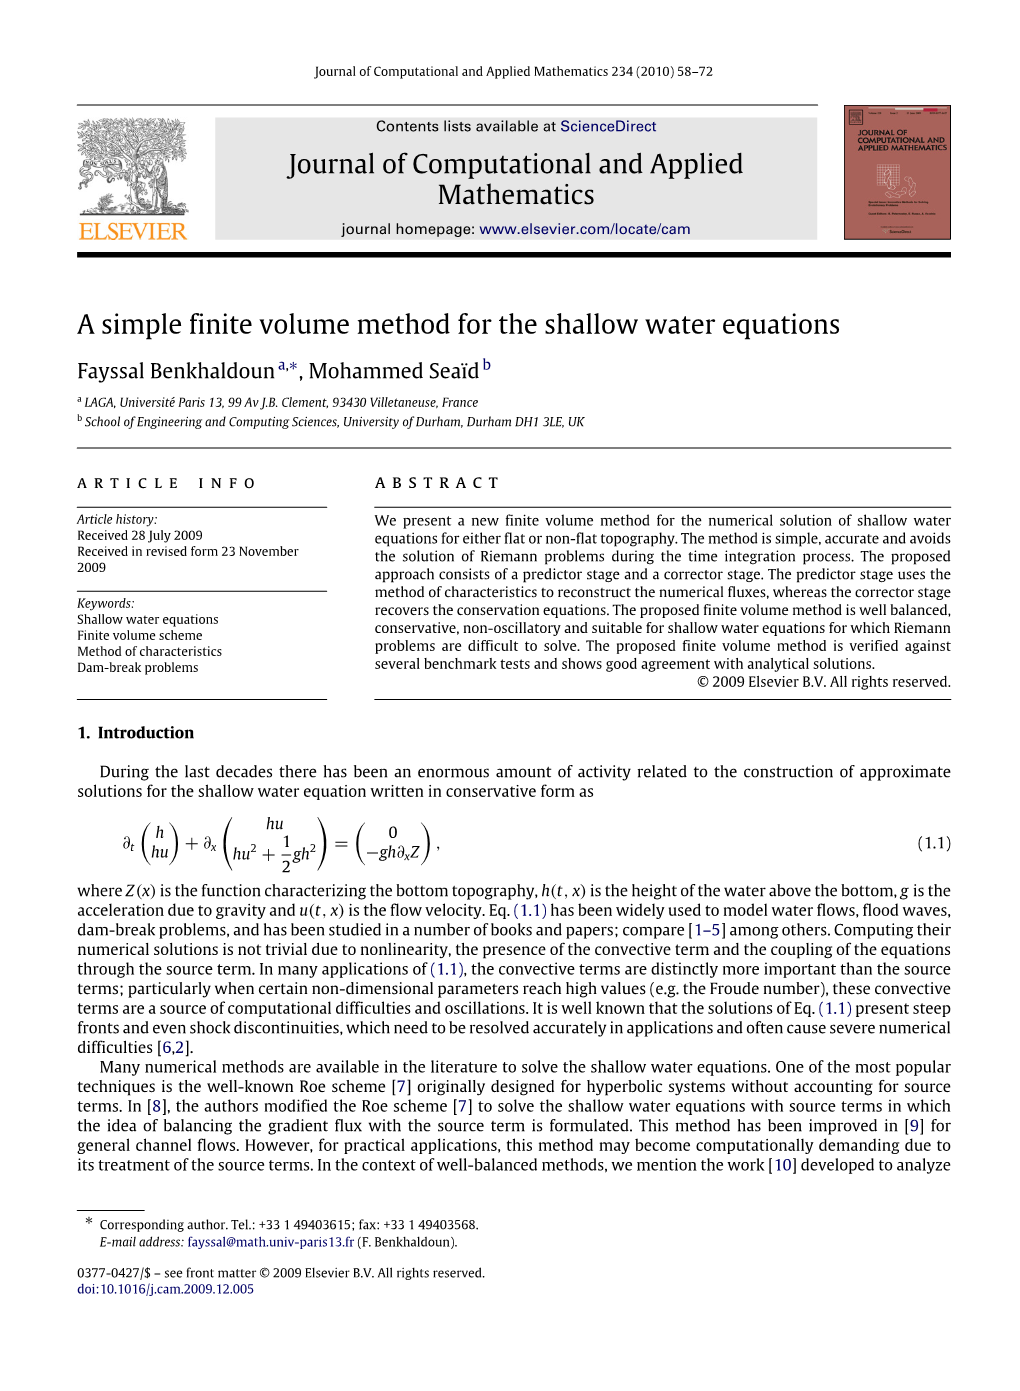 Journal of Computational and Applied Mathematics a Simple Finite Volume Method for the Shallow Water Equations